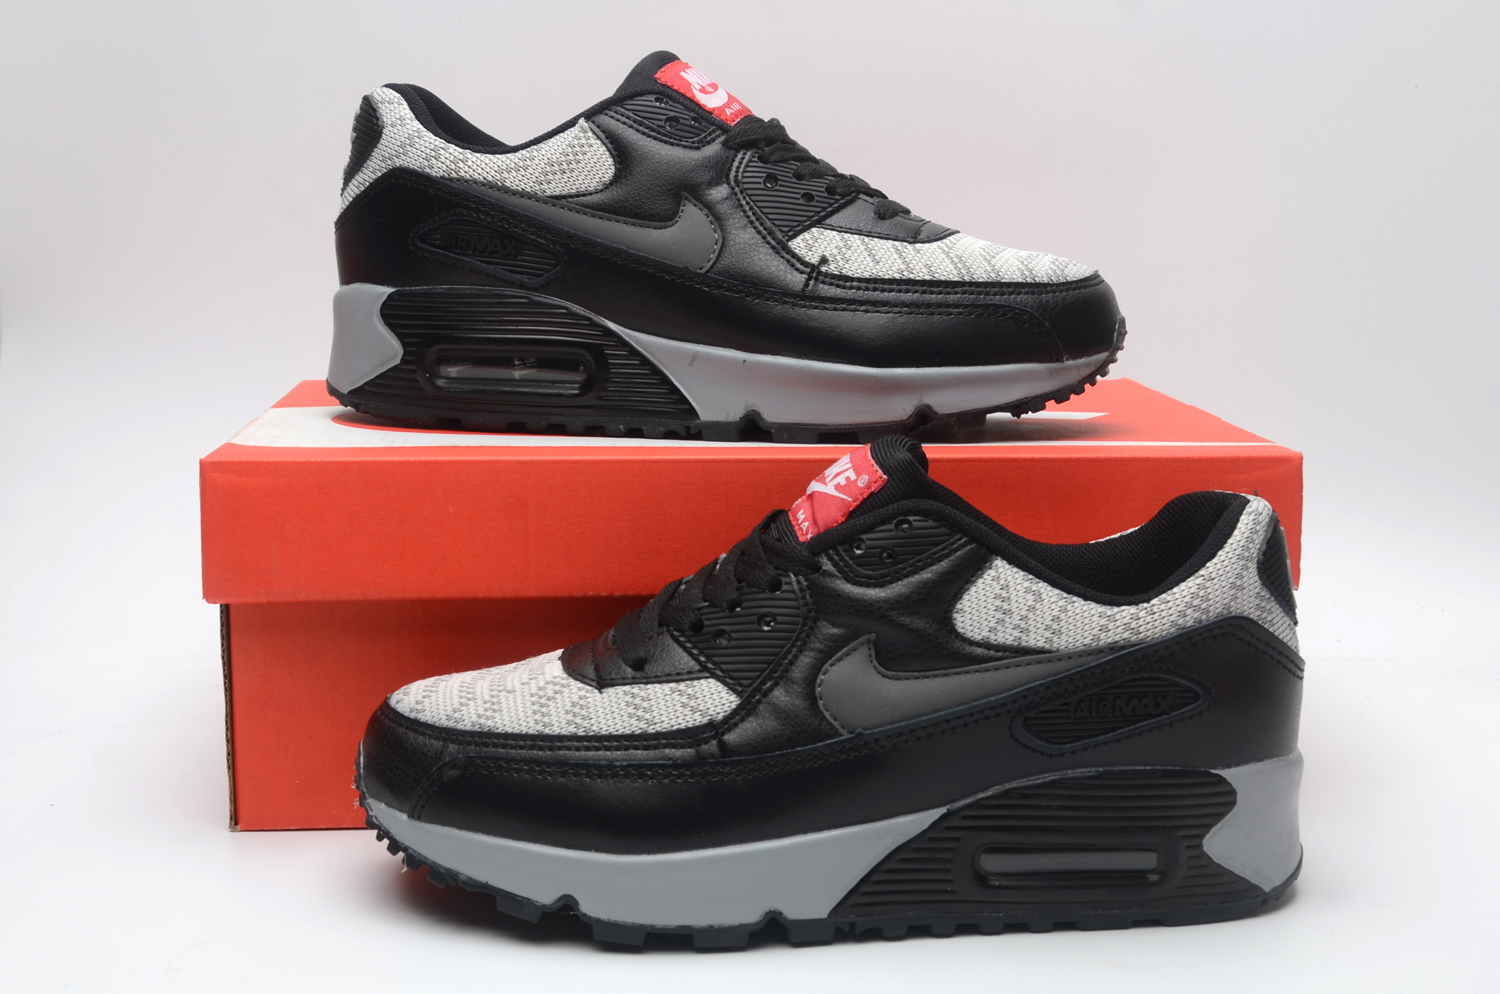 Men's Running weapon Air Max 90 Shoes 050